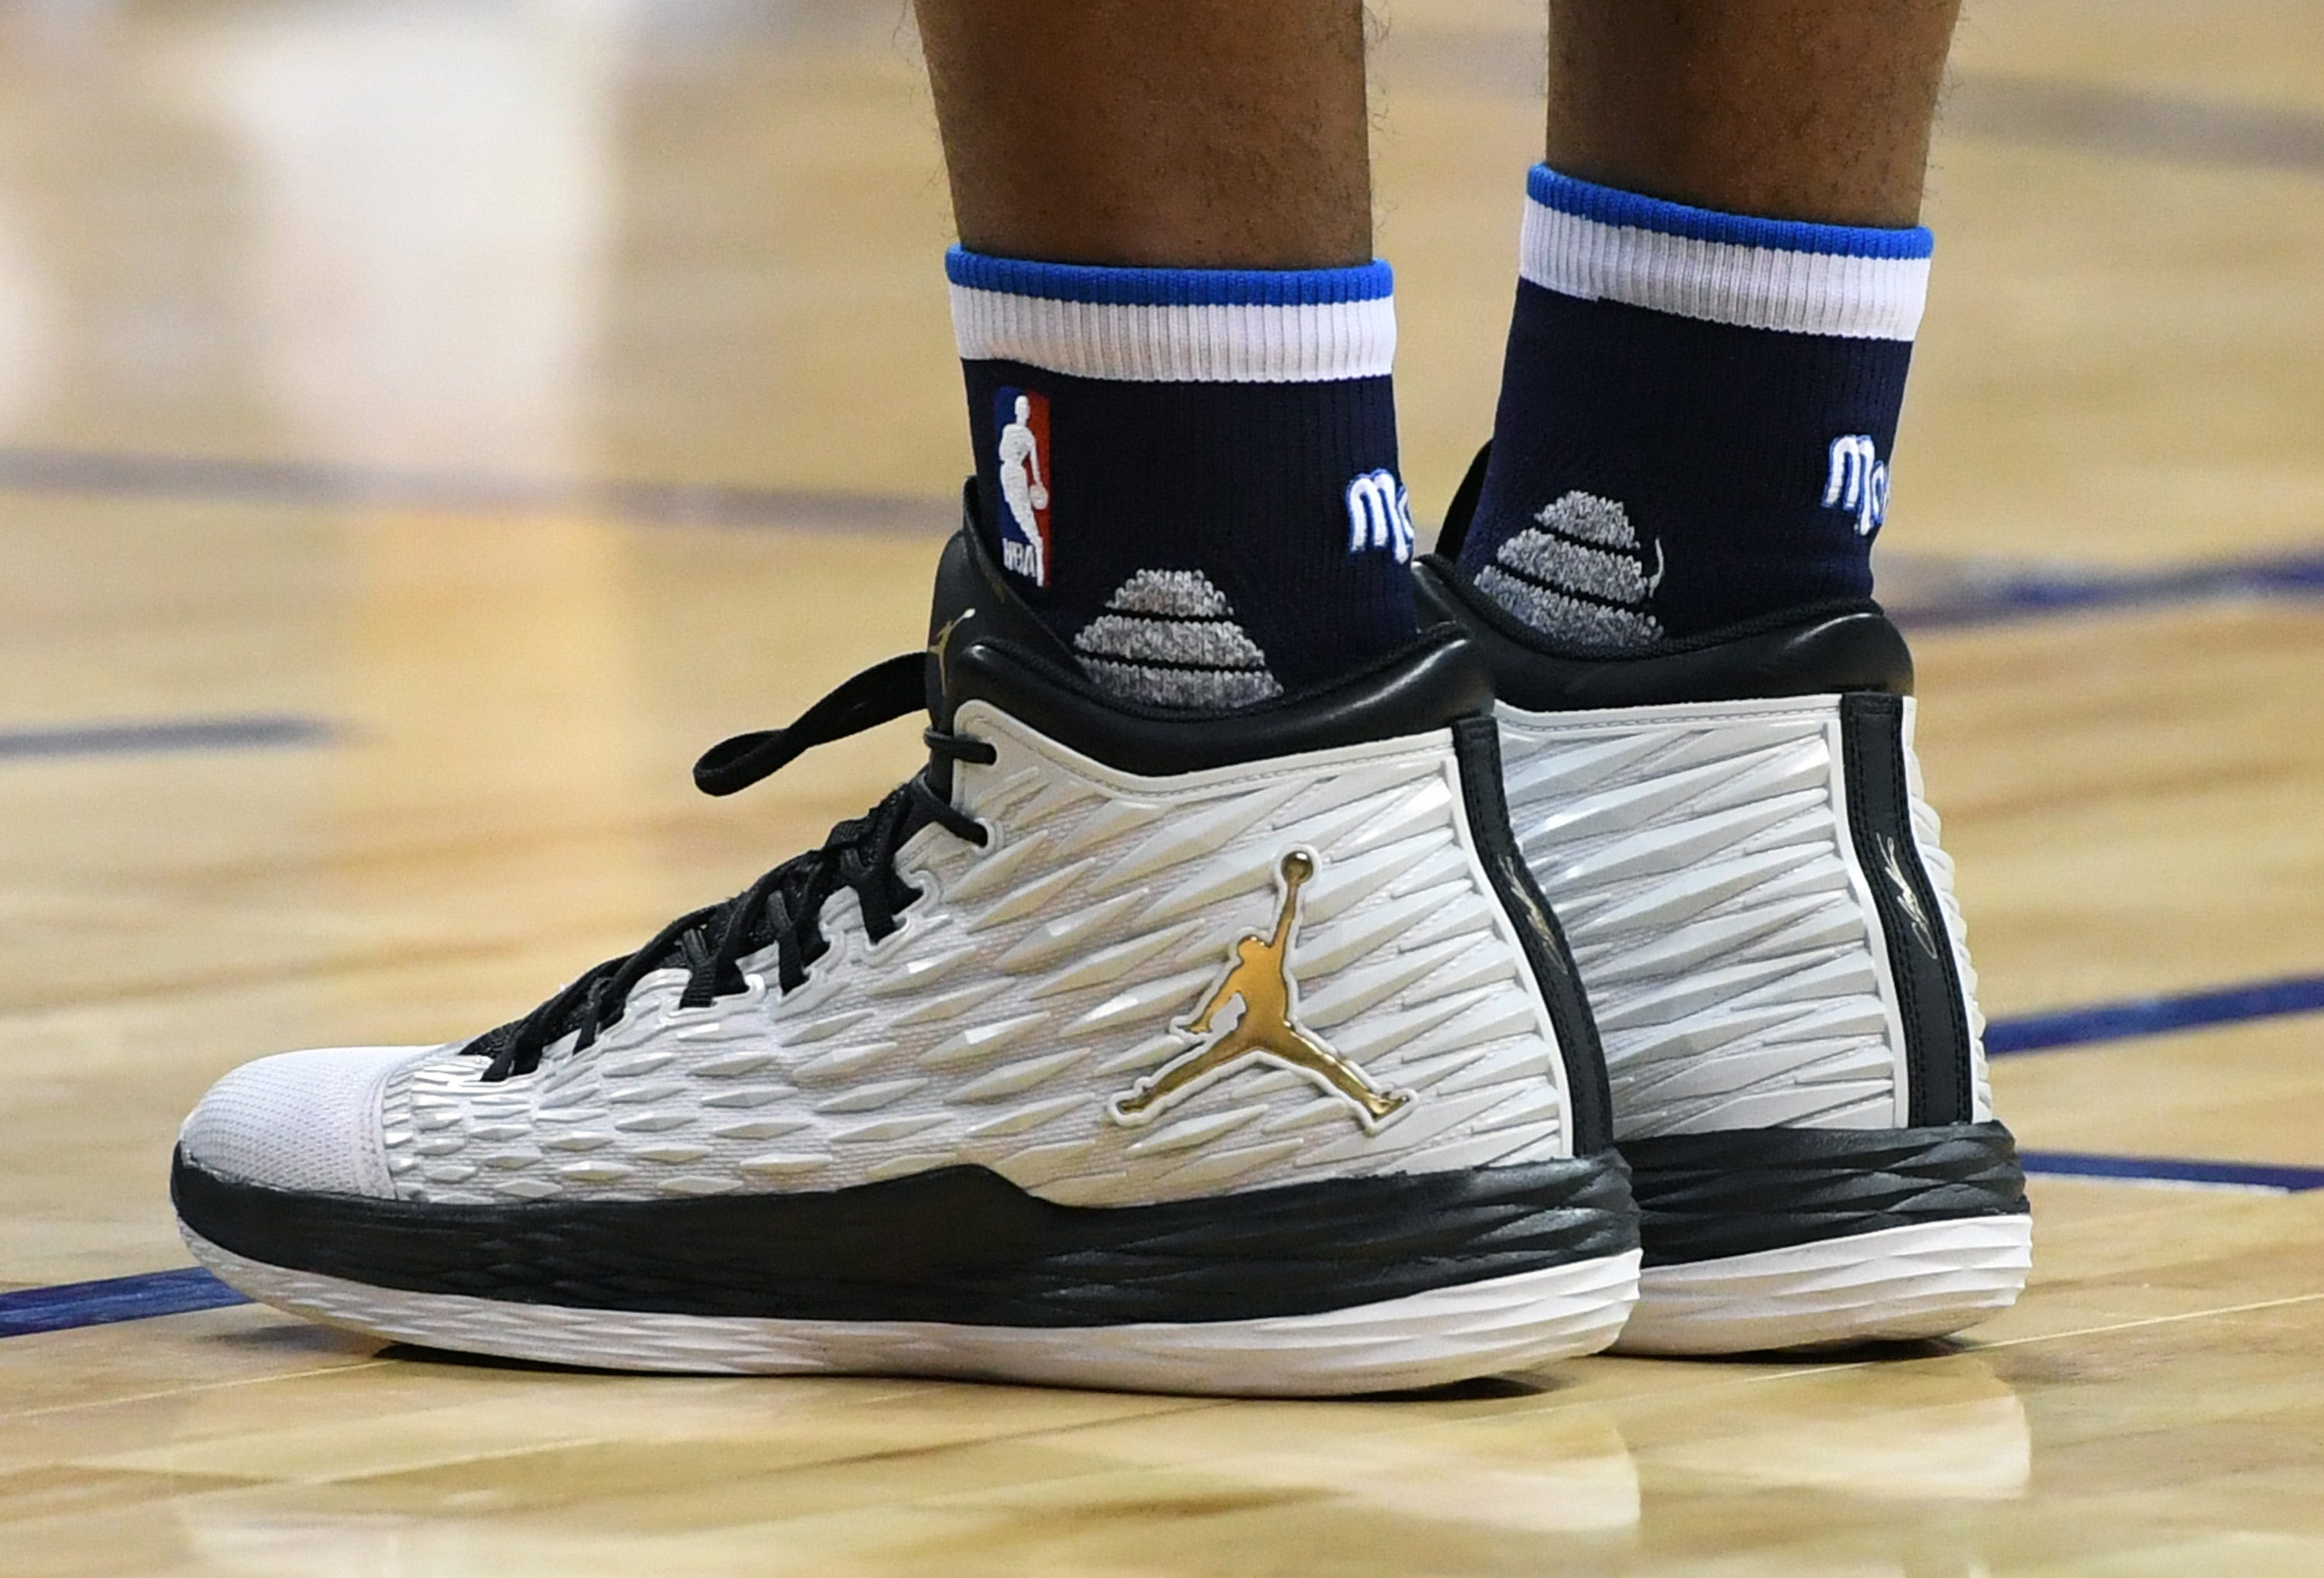 most popular shoes in nba